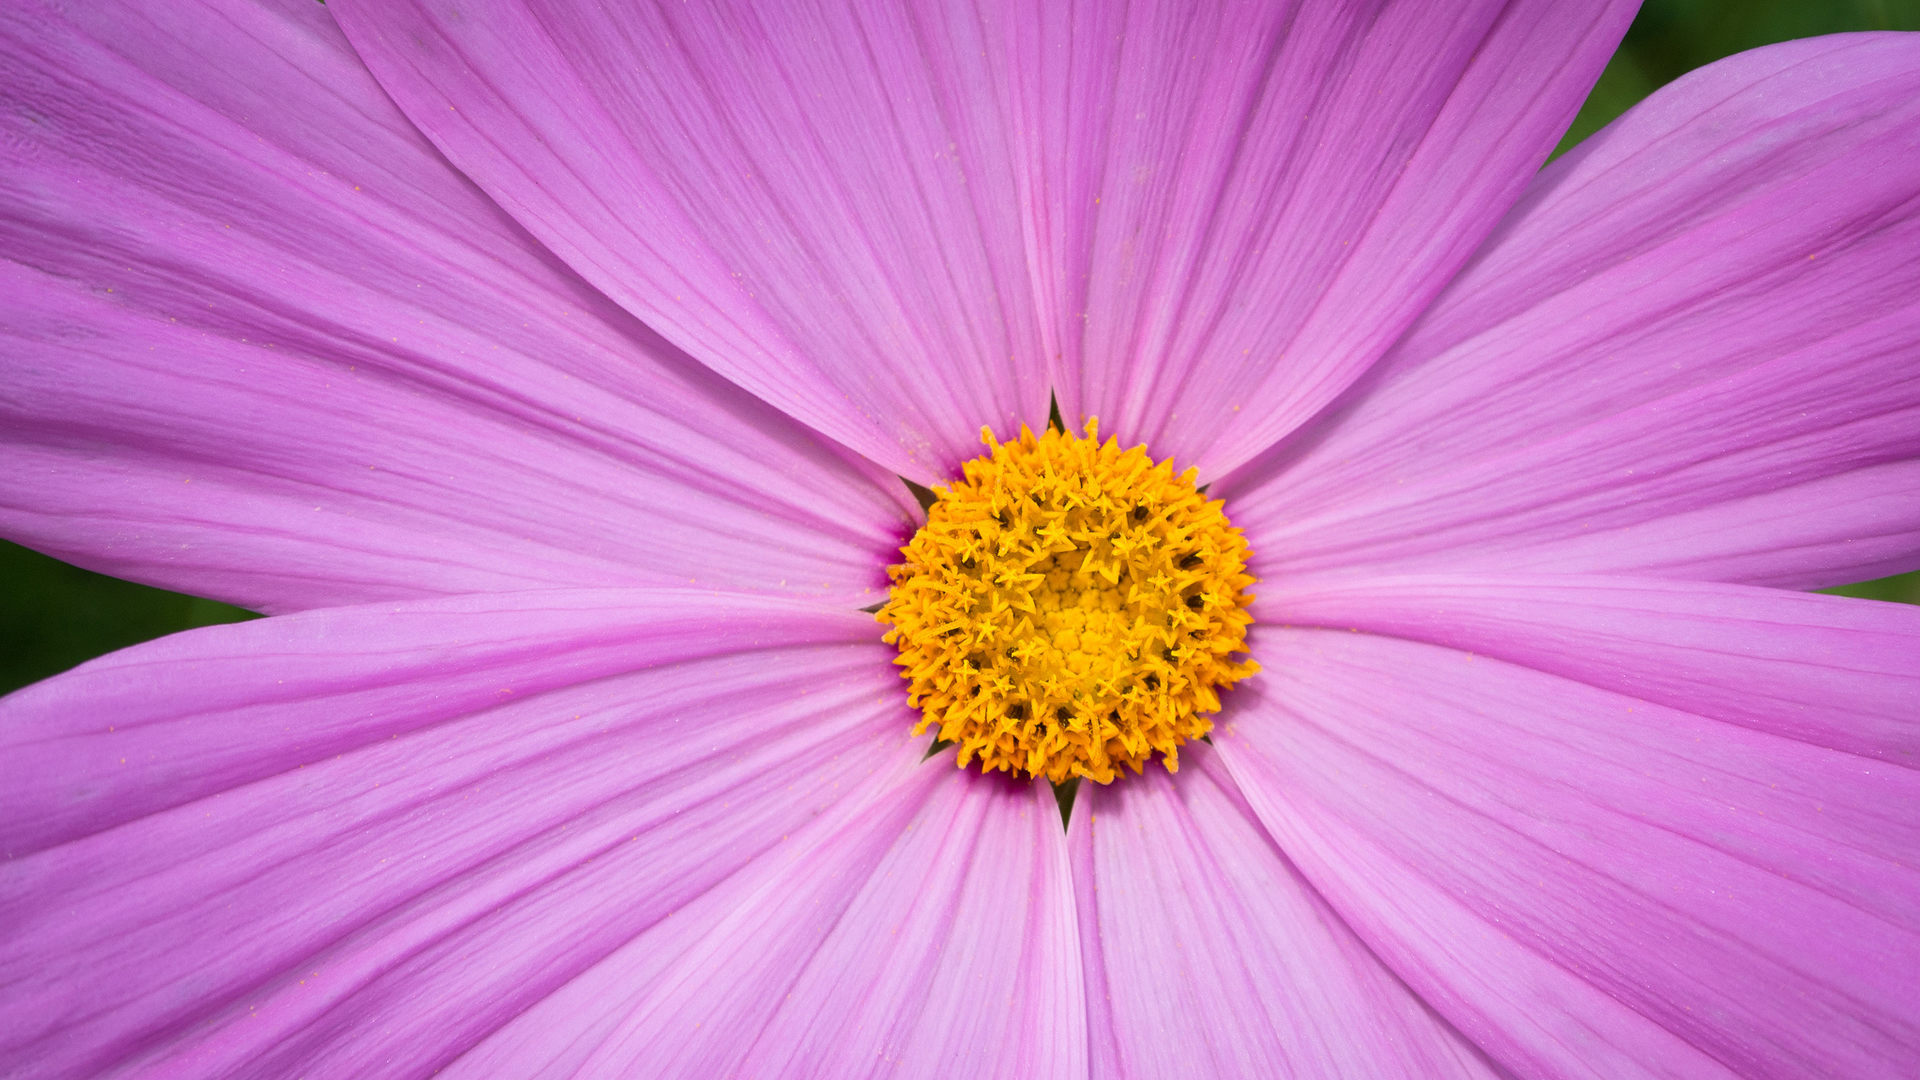 Large Pink and Yellow Flower HD Wallpaper